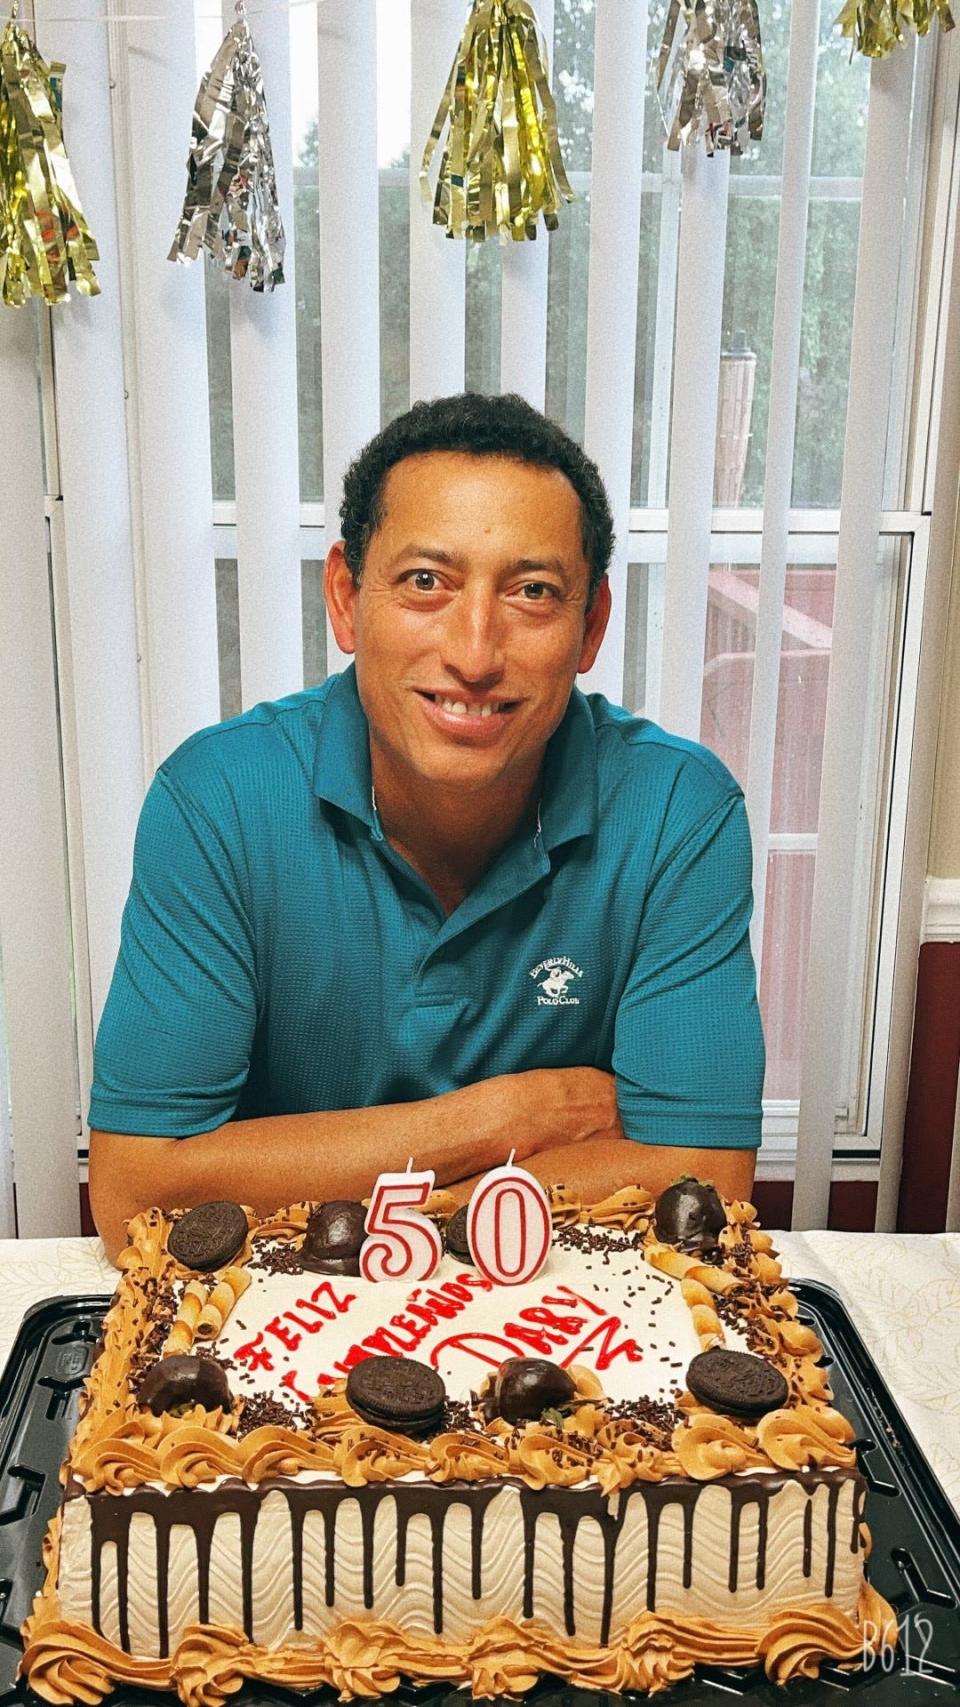 Dario Carvajal-Dominguez poses for a photo on his 50th birthday. He worked for NHM Constructors for about 20 years in the Asheville area before his death in December 2021.